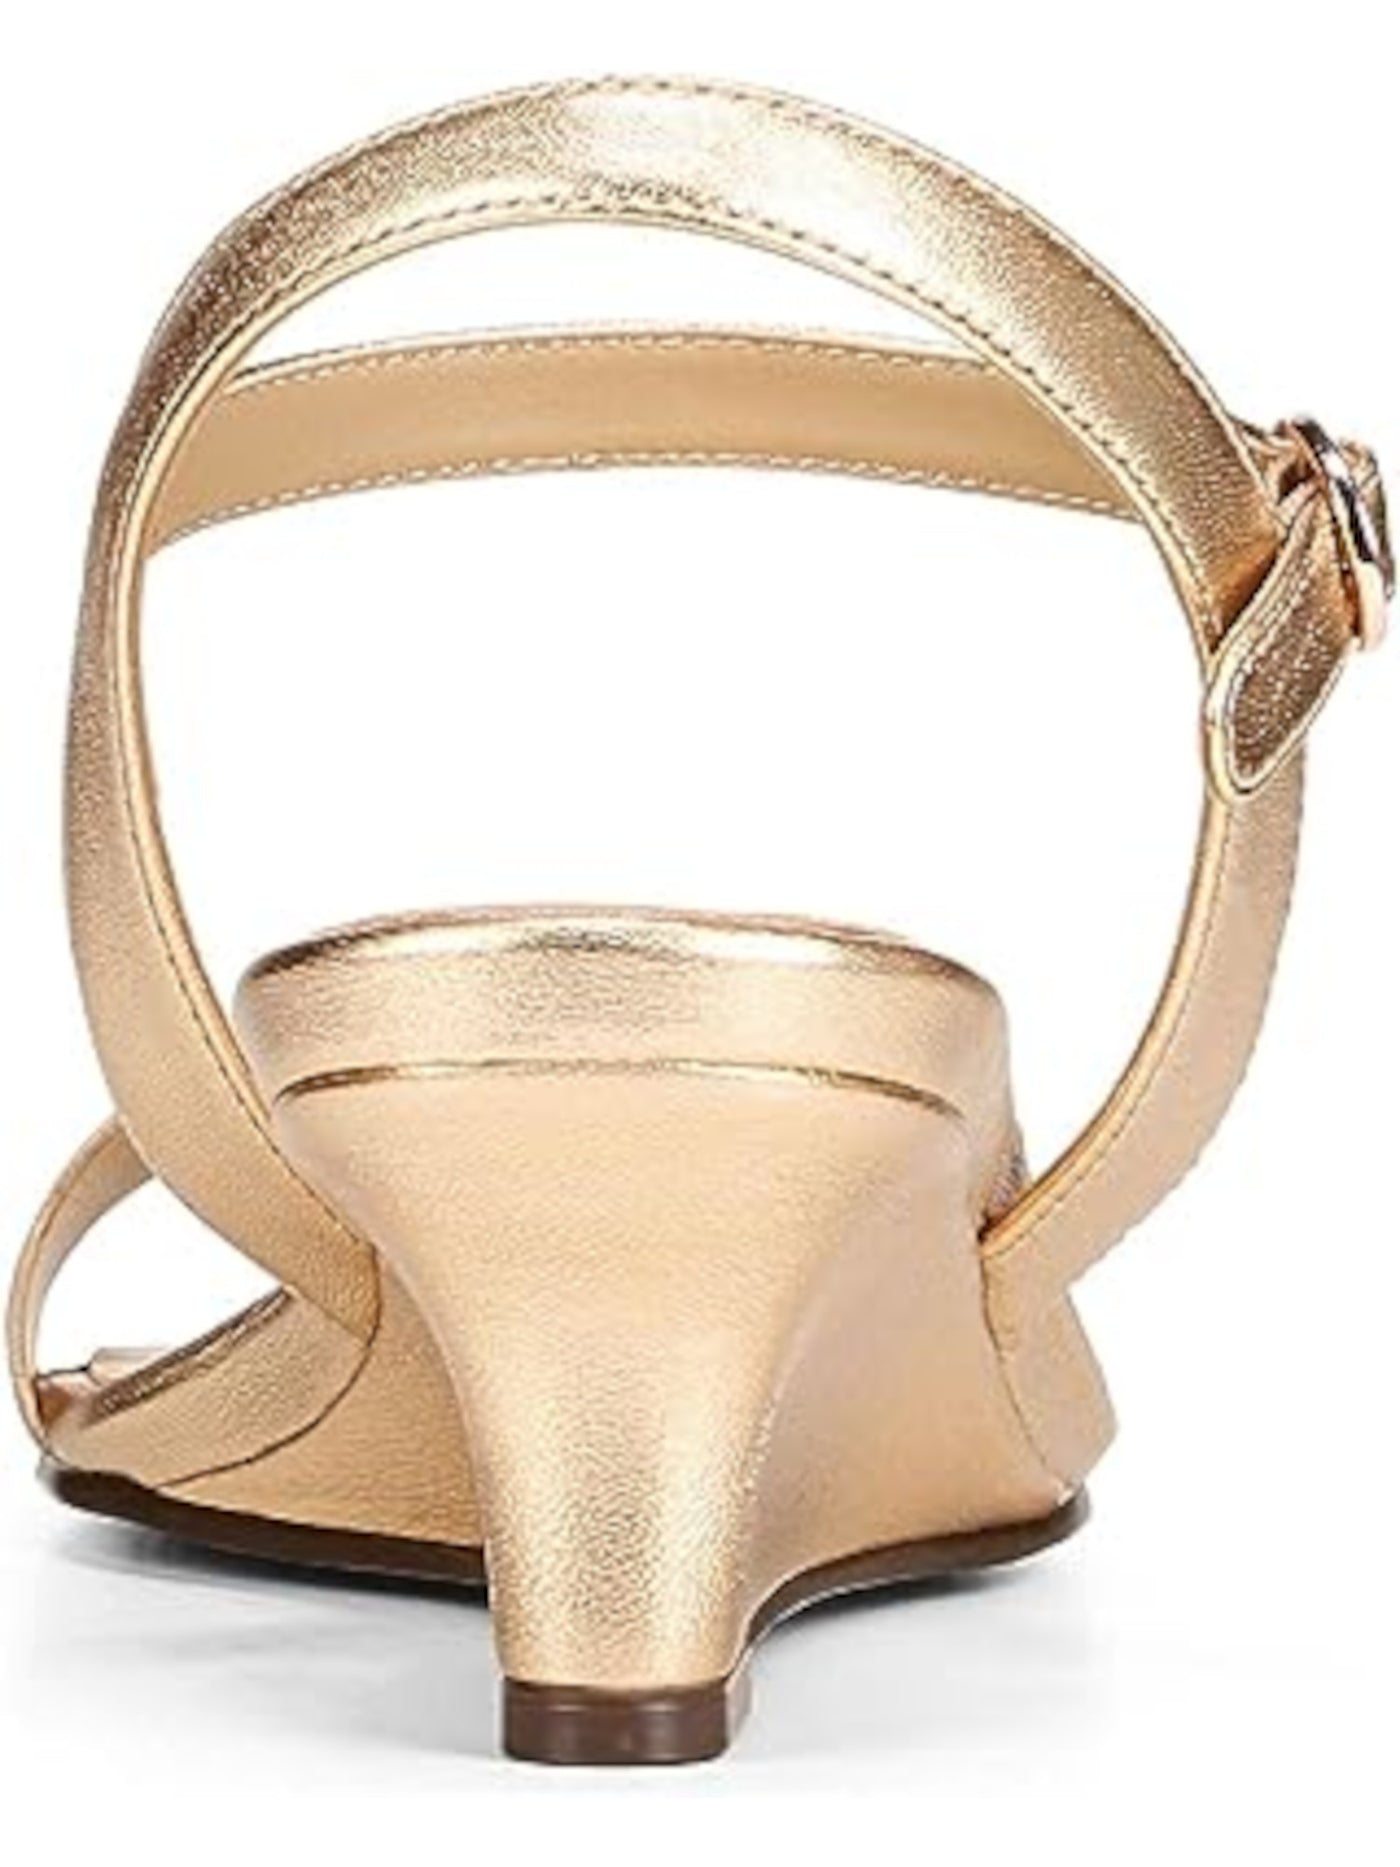 NATURALIZER Womens Gold Comfort Scalloped Non-Slip Lacey Round Toe Wedge Buckle Leather Heeled Sandal 8.5 M